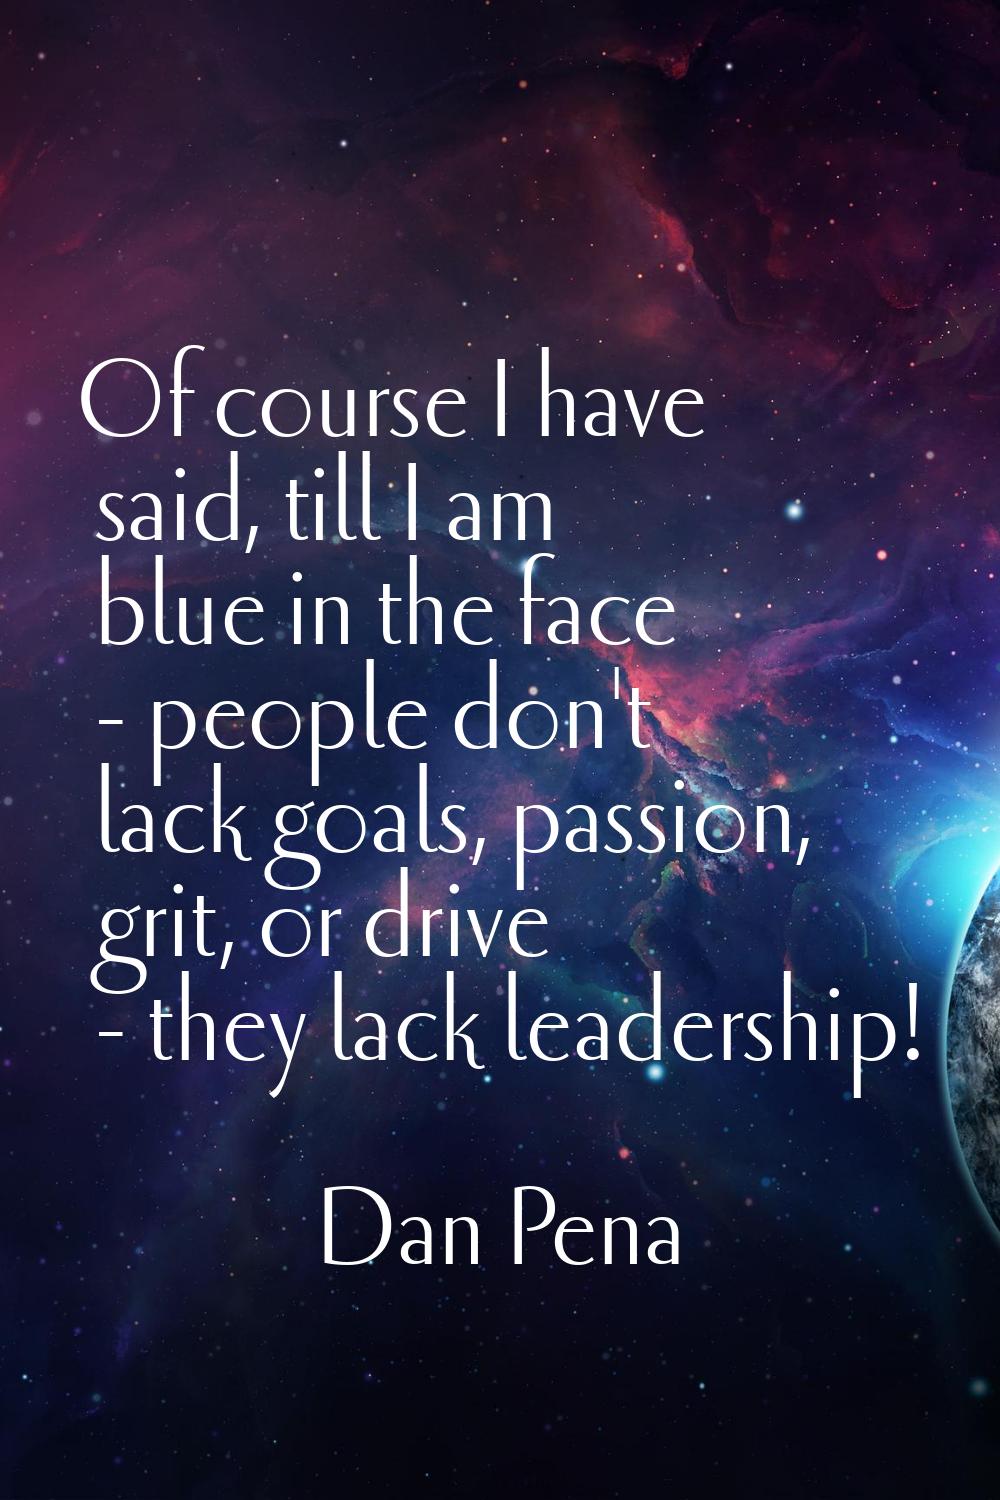 Of course I have said, till I am blue in the face - people don't lack goals, passion, grit, or driv